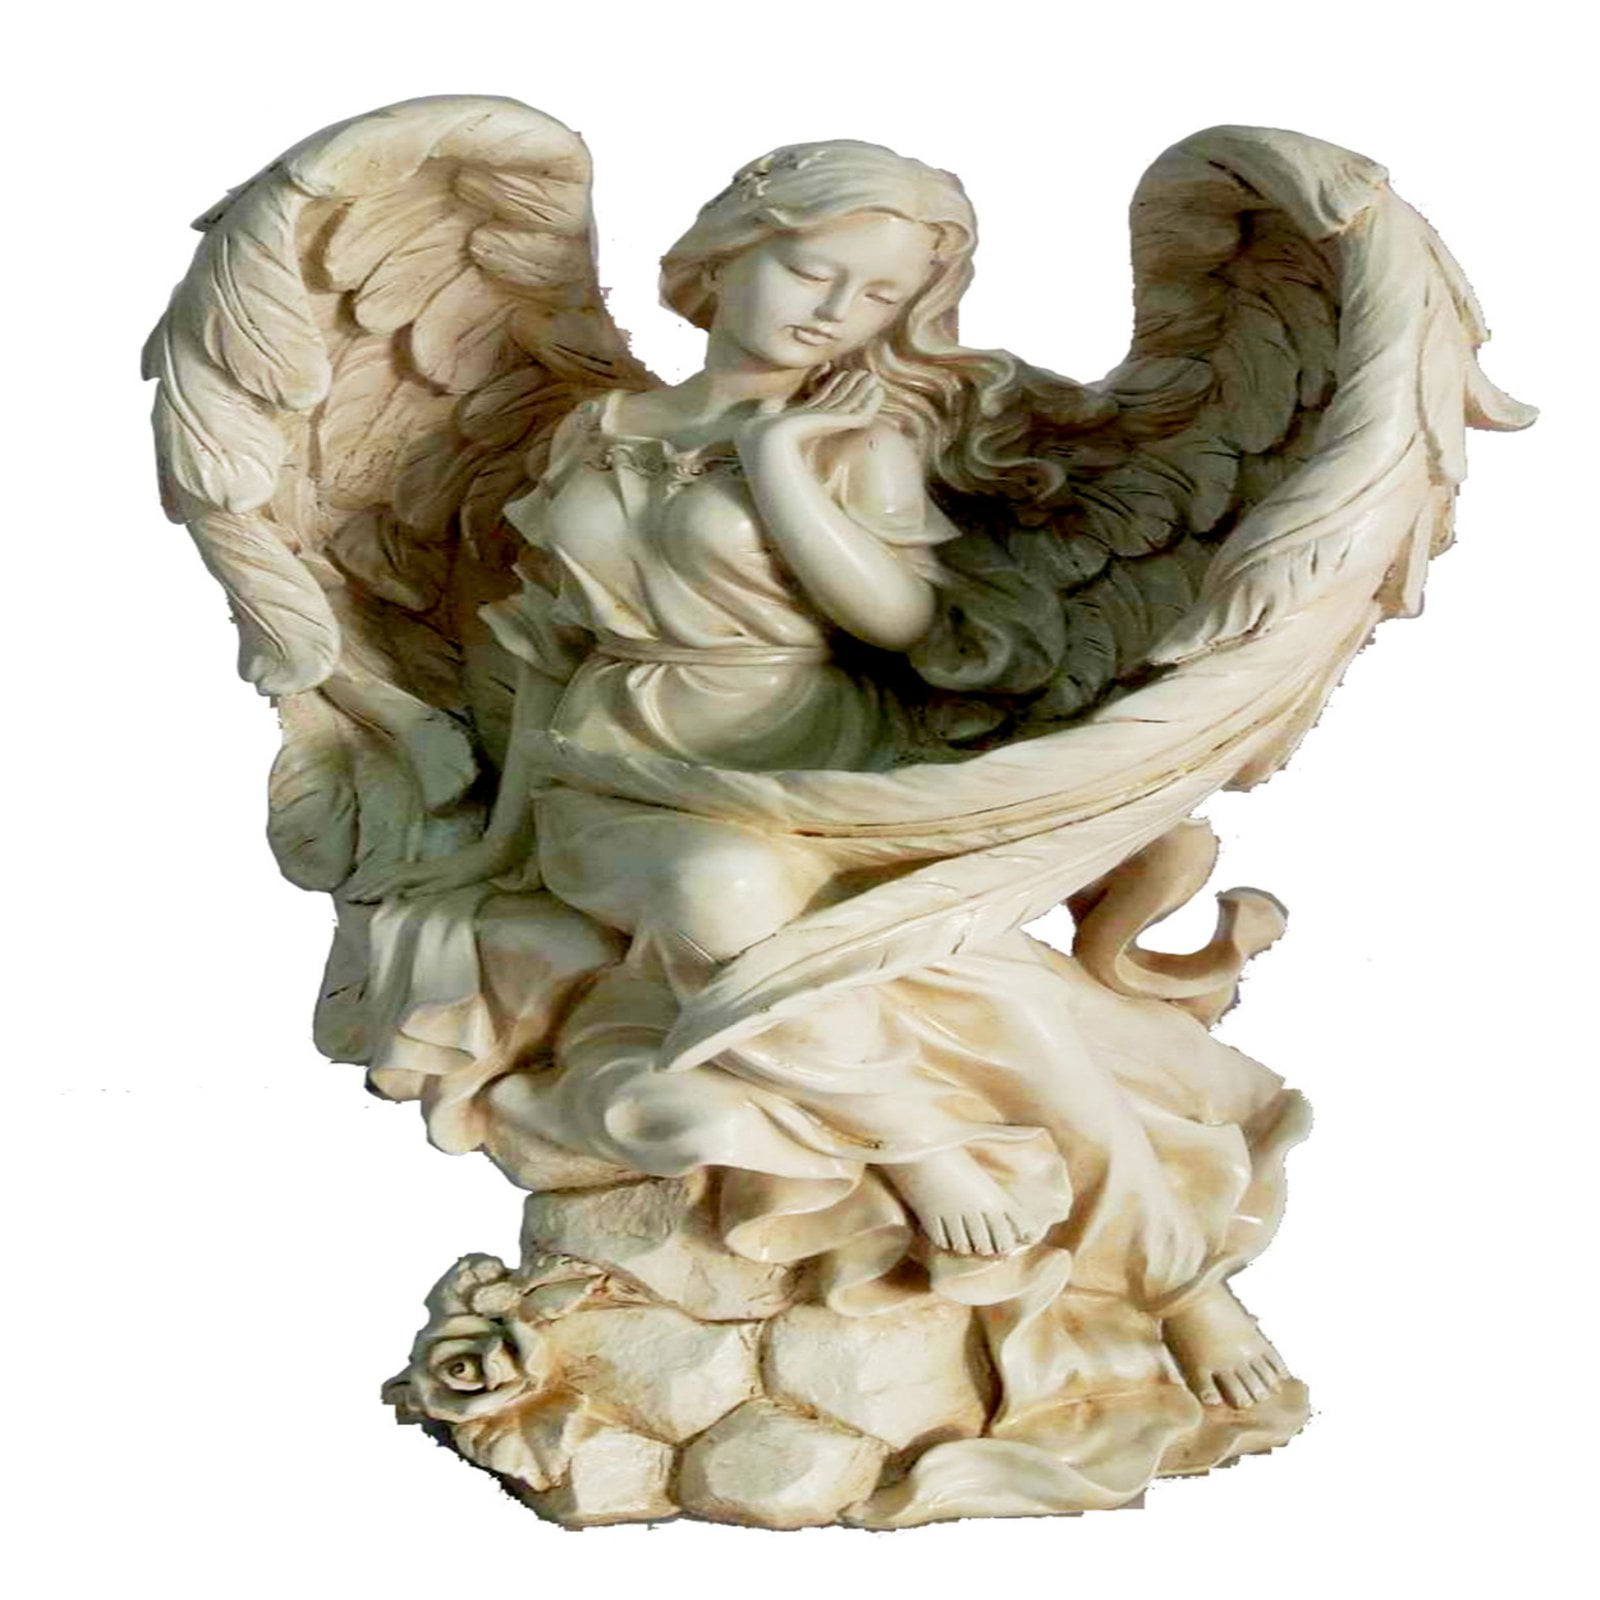 Blessing Guardian Angel Cherub Figurine Baptism Party Baby Shower Cake Top Gift 